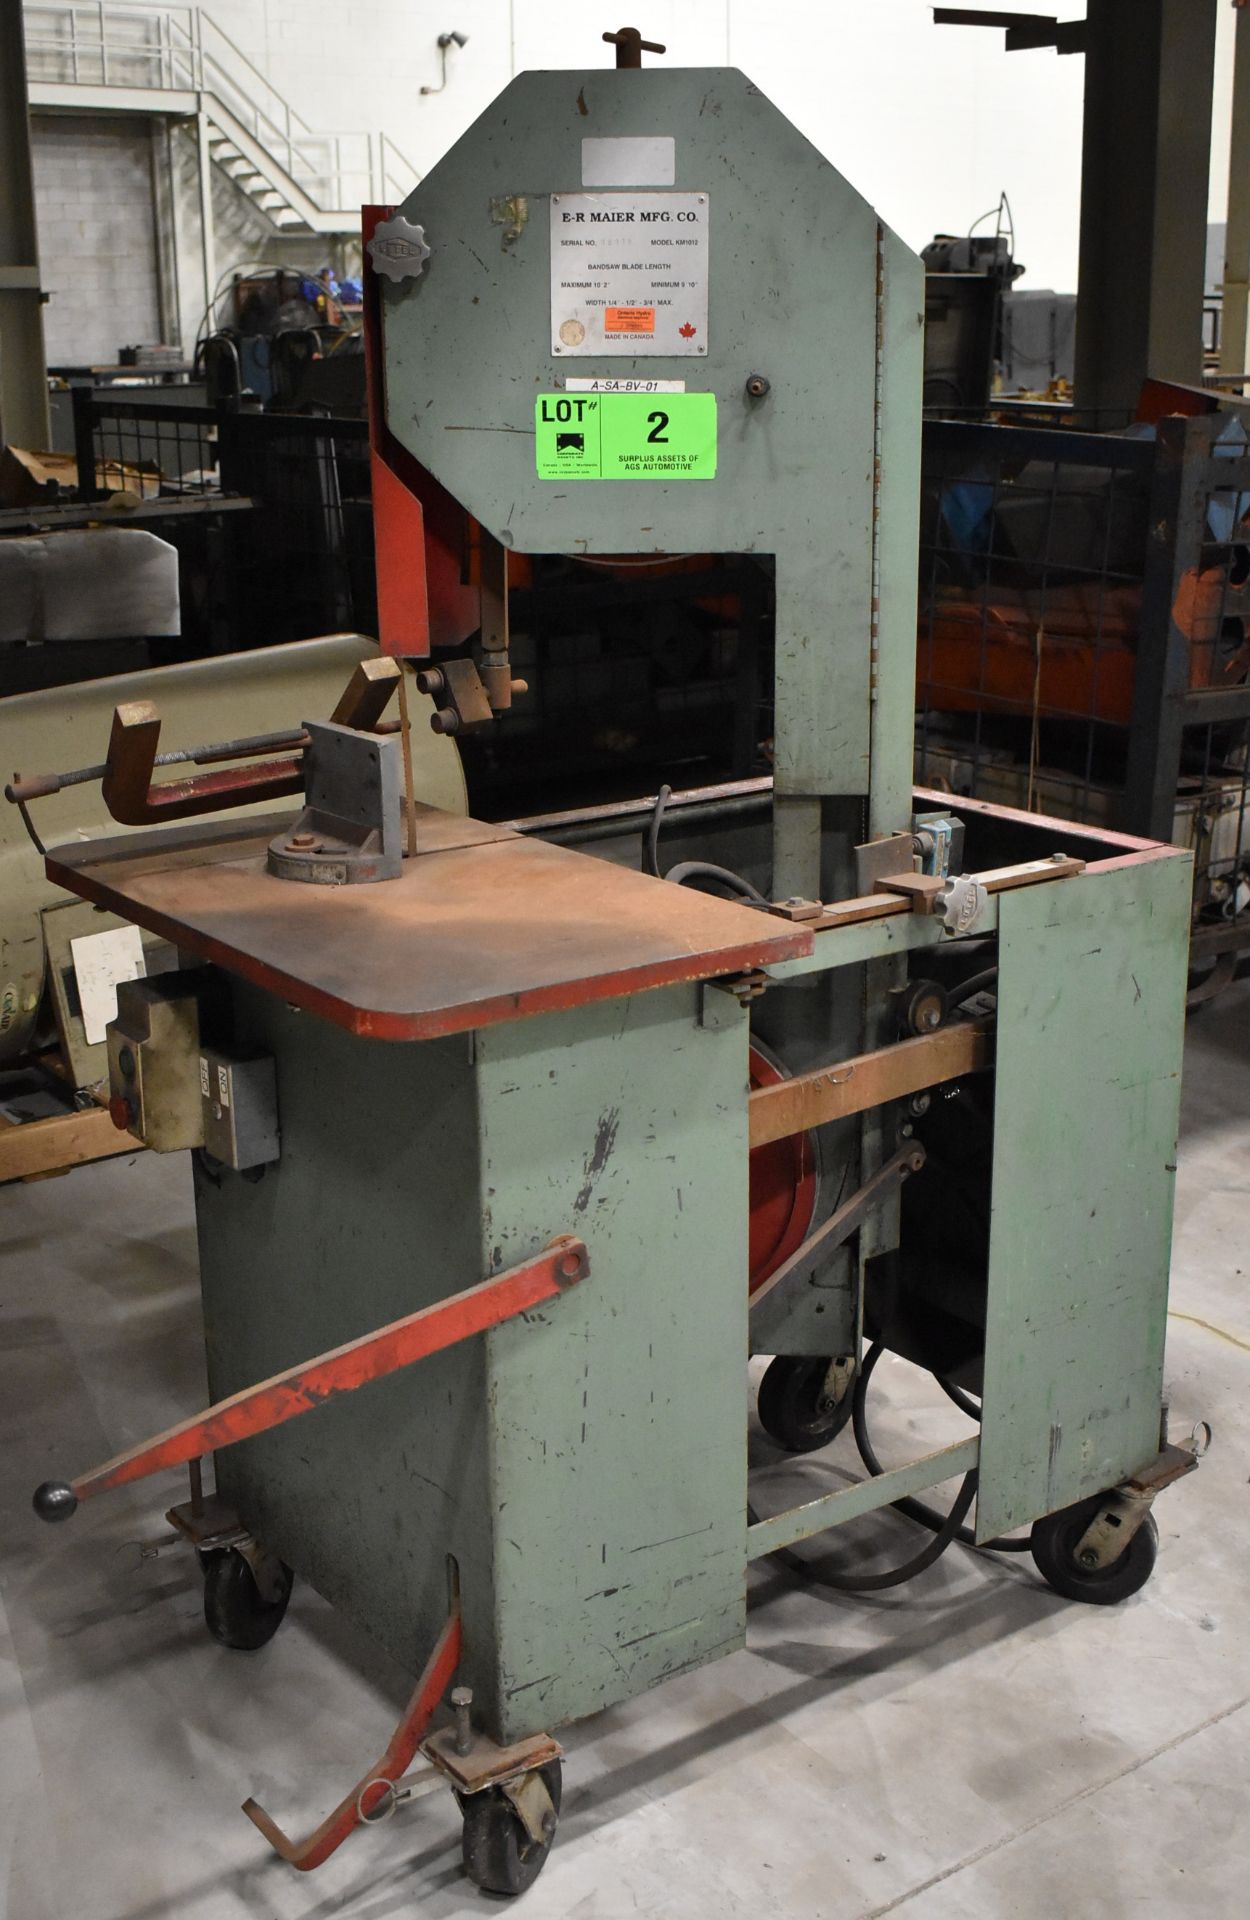 E-R MAIER KM1012 ROLL-IN VERTICAL BAND SAW WITH 30"X18" TABLE, 15" THROAT, 14" MAX. WORKPIECE